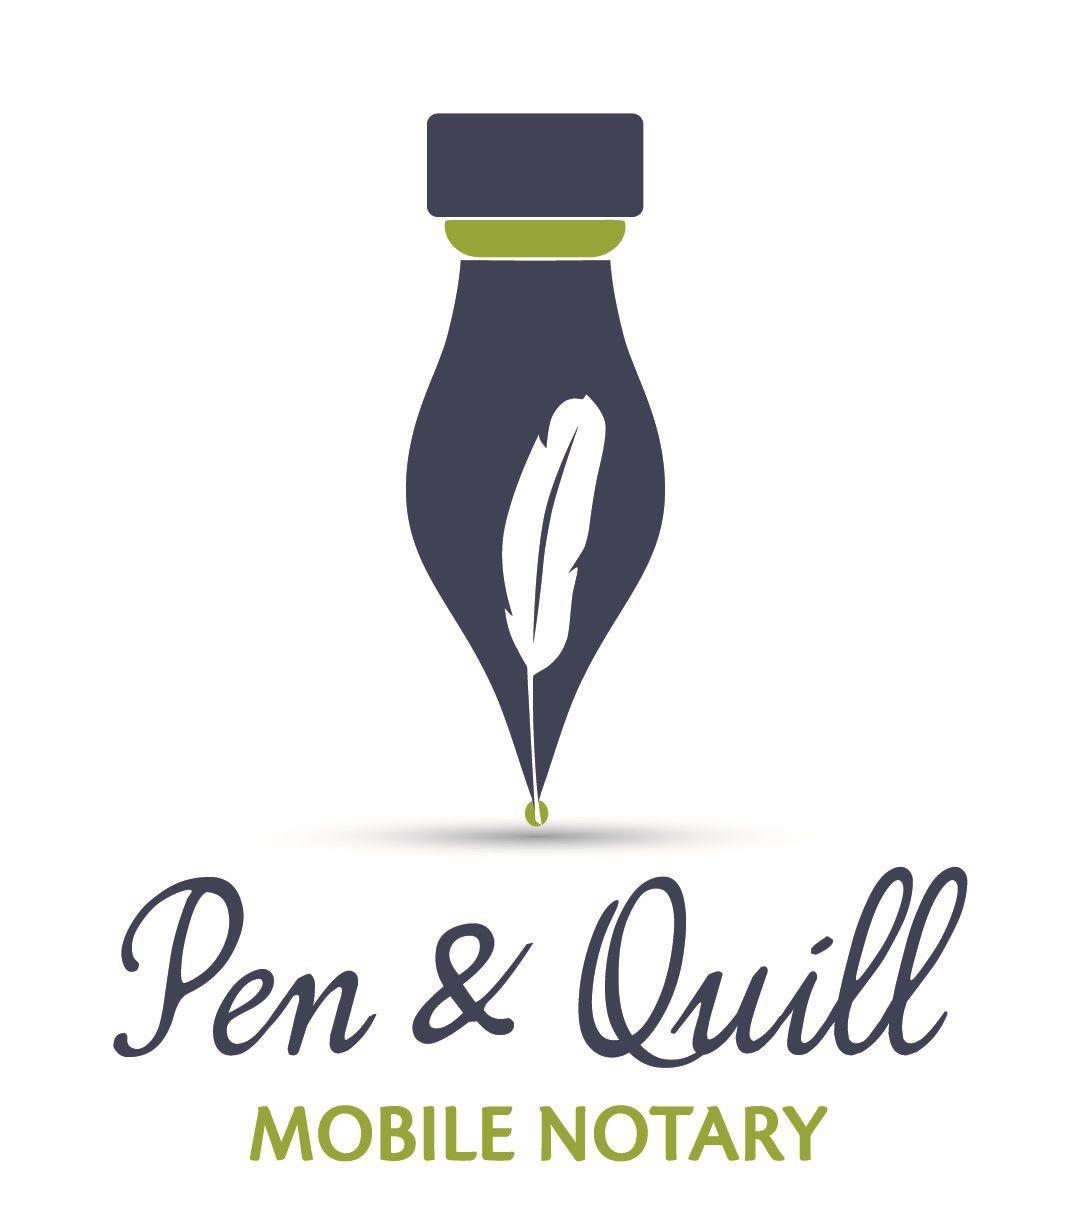 Quill Pen Logo - Pen and Quill Logo Final - Pen and Quill Mobile Notary